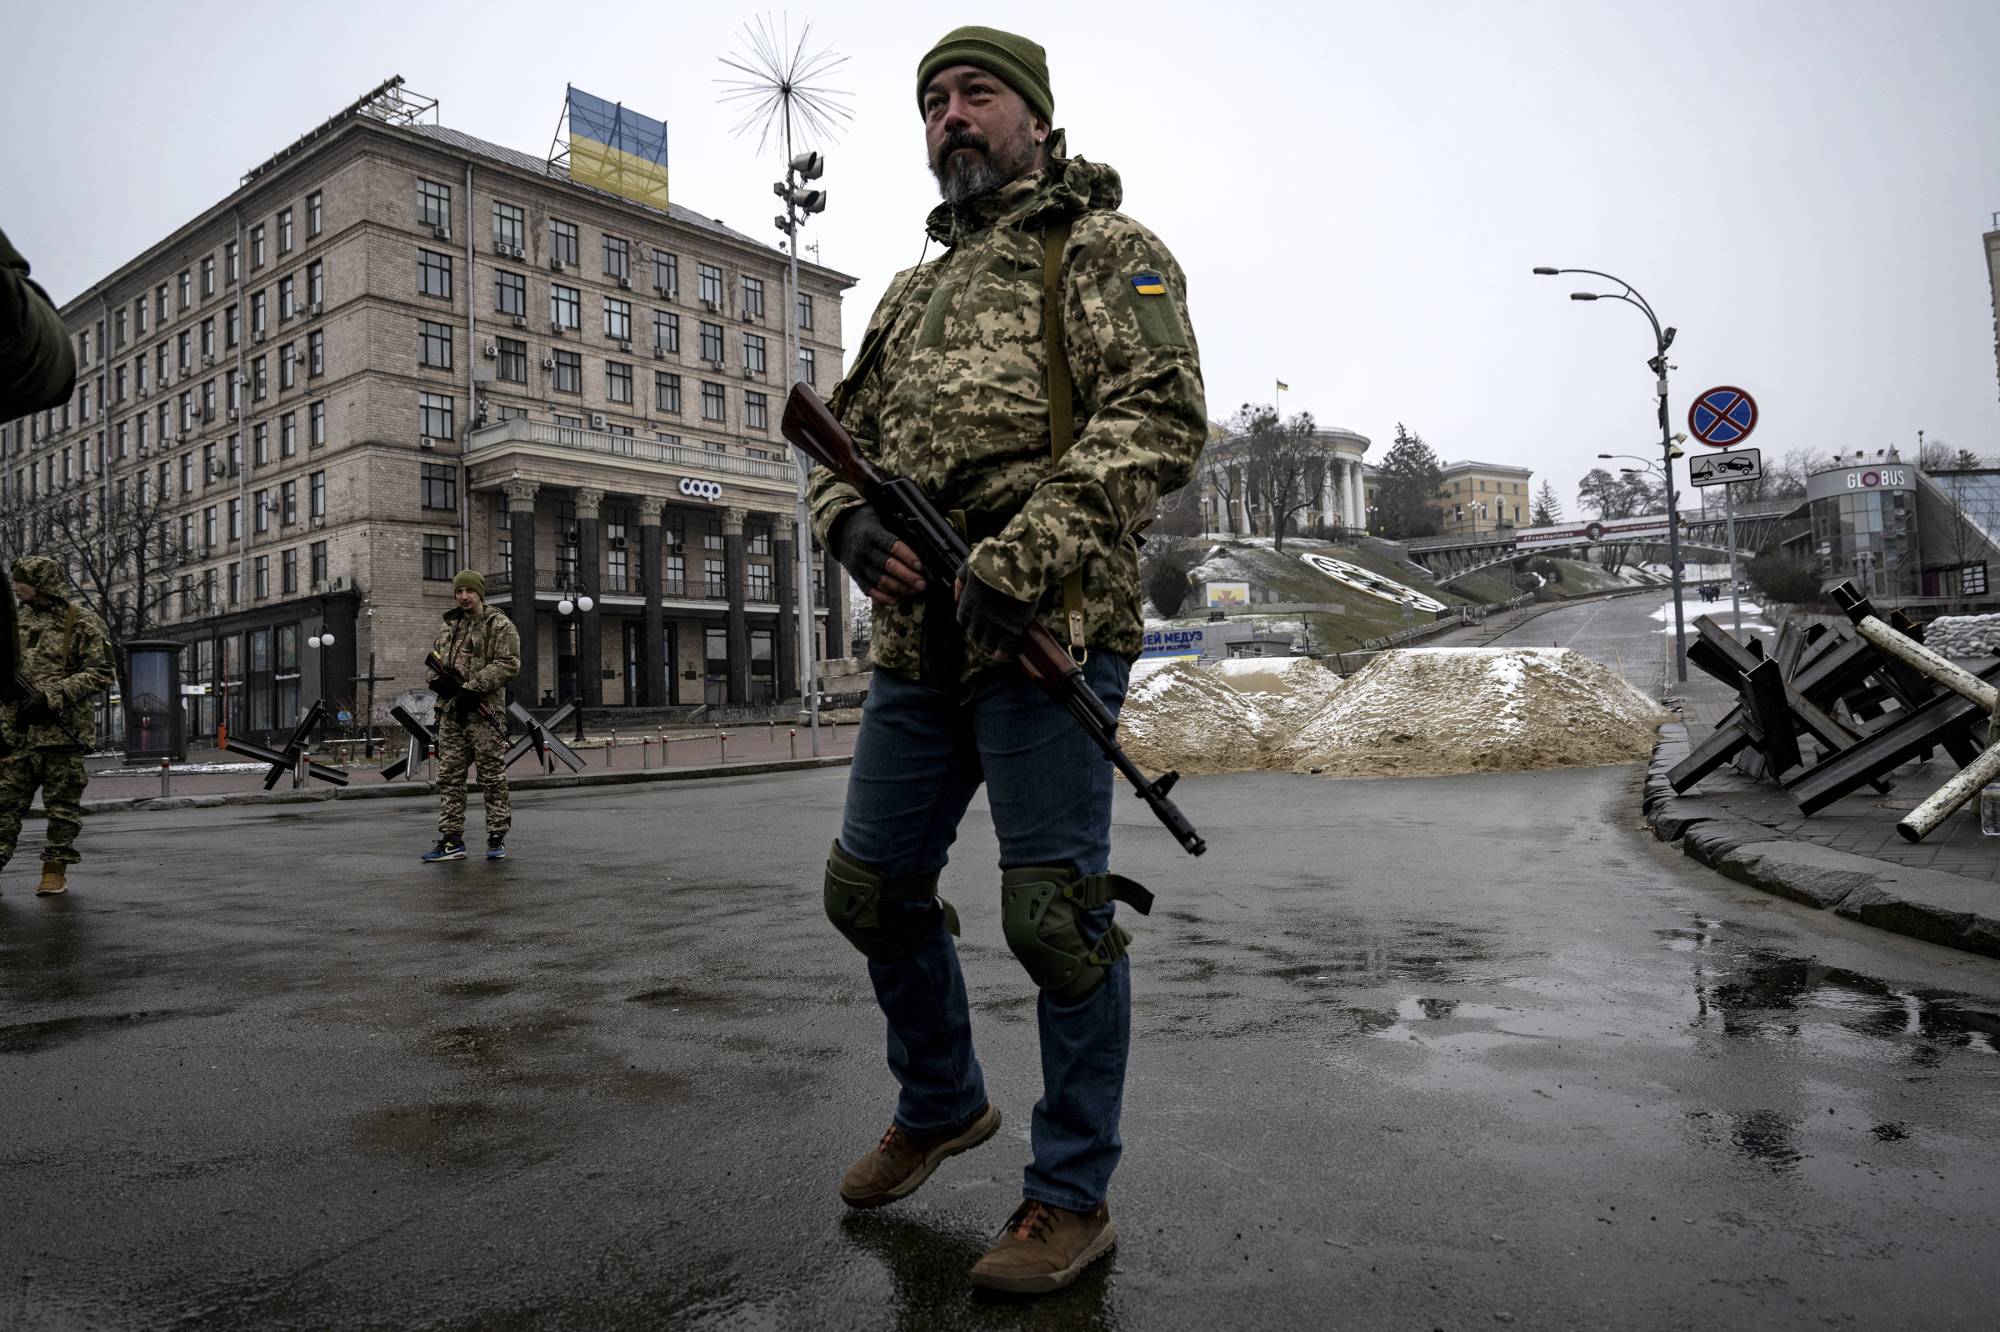 Ukrainian security forces guard Independence Square in central Kyiv on Wednesday. U.S. President Joe Biden has applauded the heroism and resilience of the Ukrainian people in their war to thwart Russian aggression.  | LYNSEY ADDARIO / THE NEW YORK TIMES